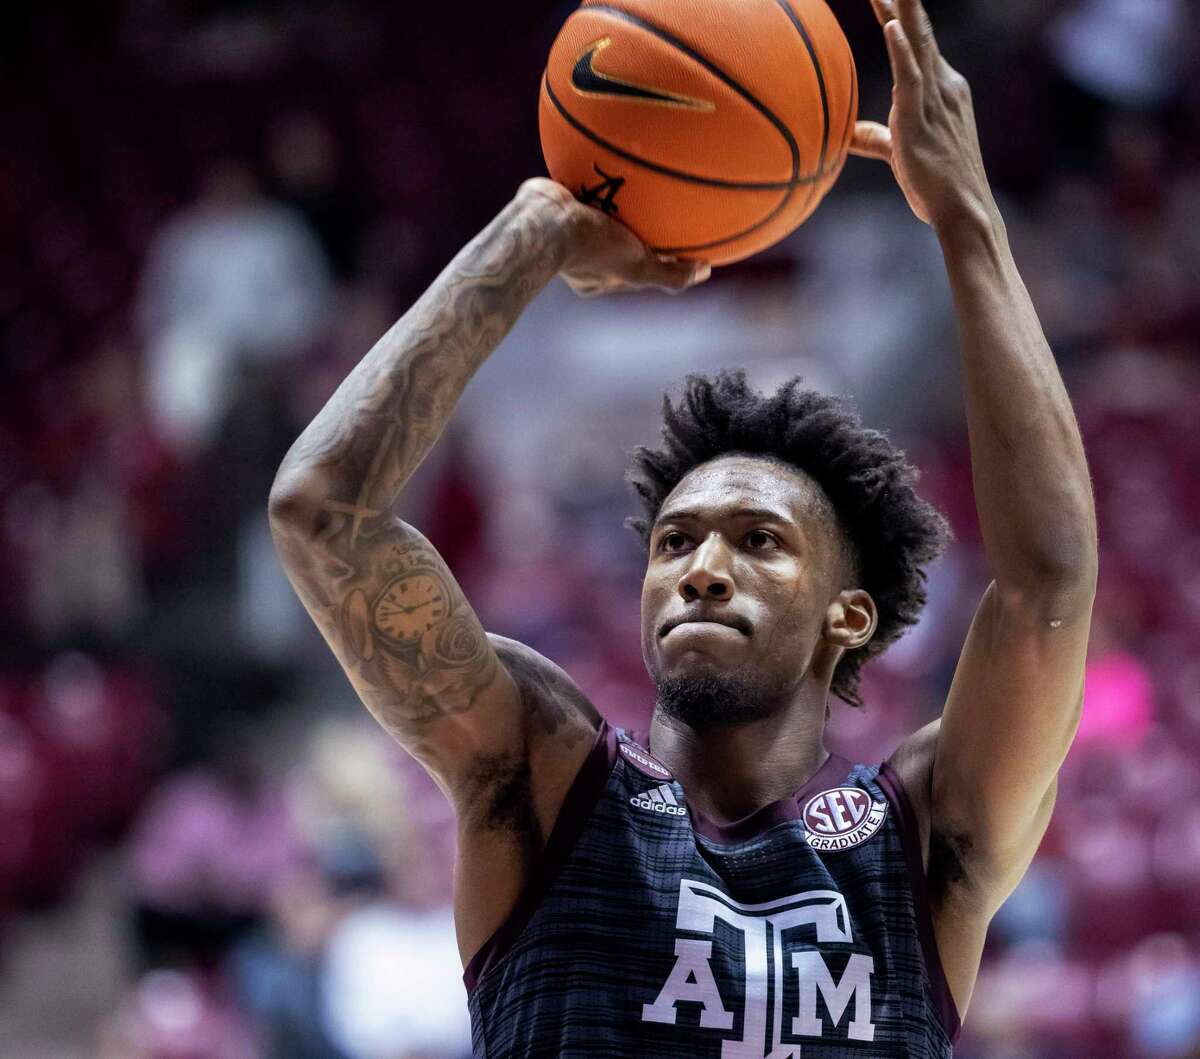 Texas A&M guard Quenton Jackson shoots a free throw against Alabama during the second half of an NCAA college basketball game Wednesday, March 2, 2022, in Tuscaloosa, Ala. (AP Photo/Vasha Hunt)